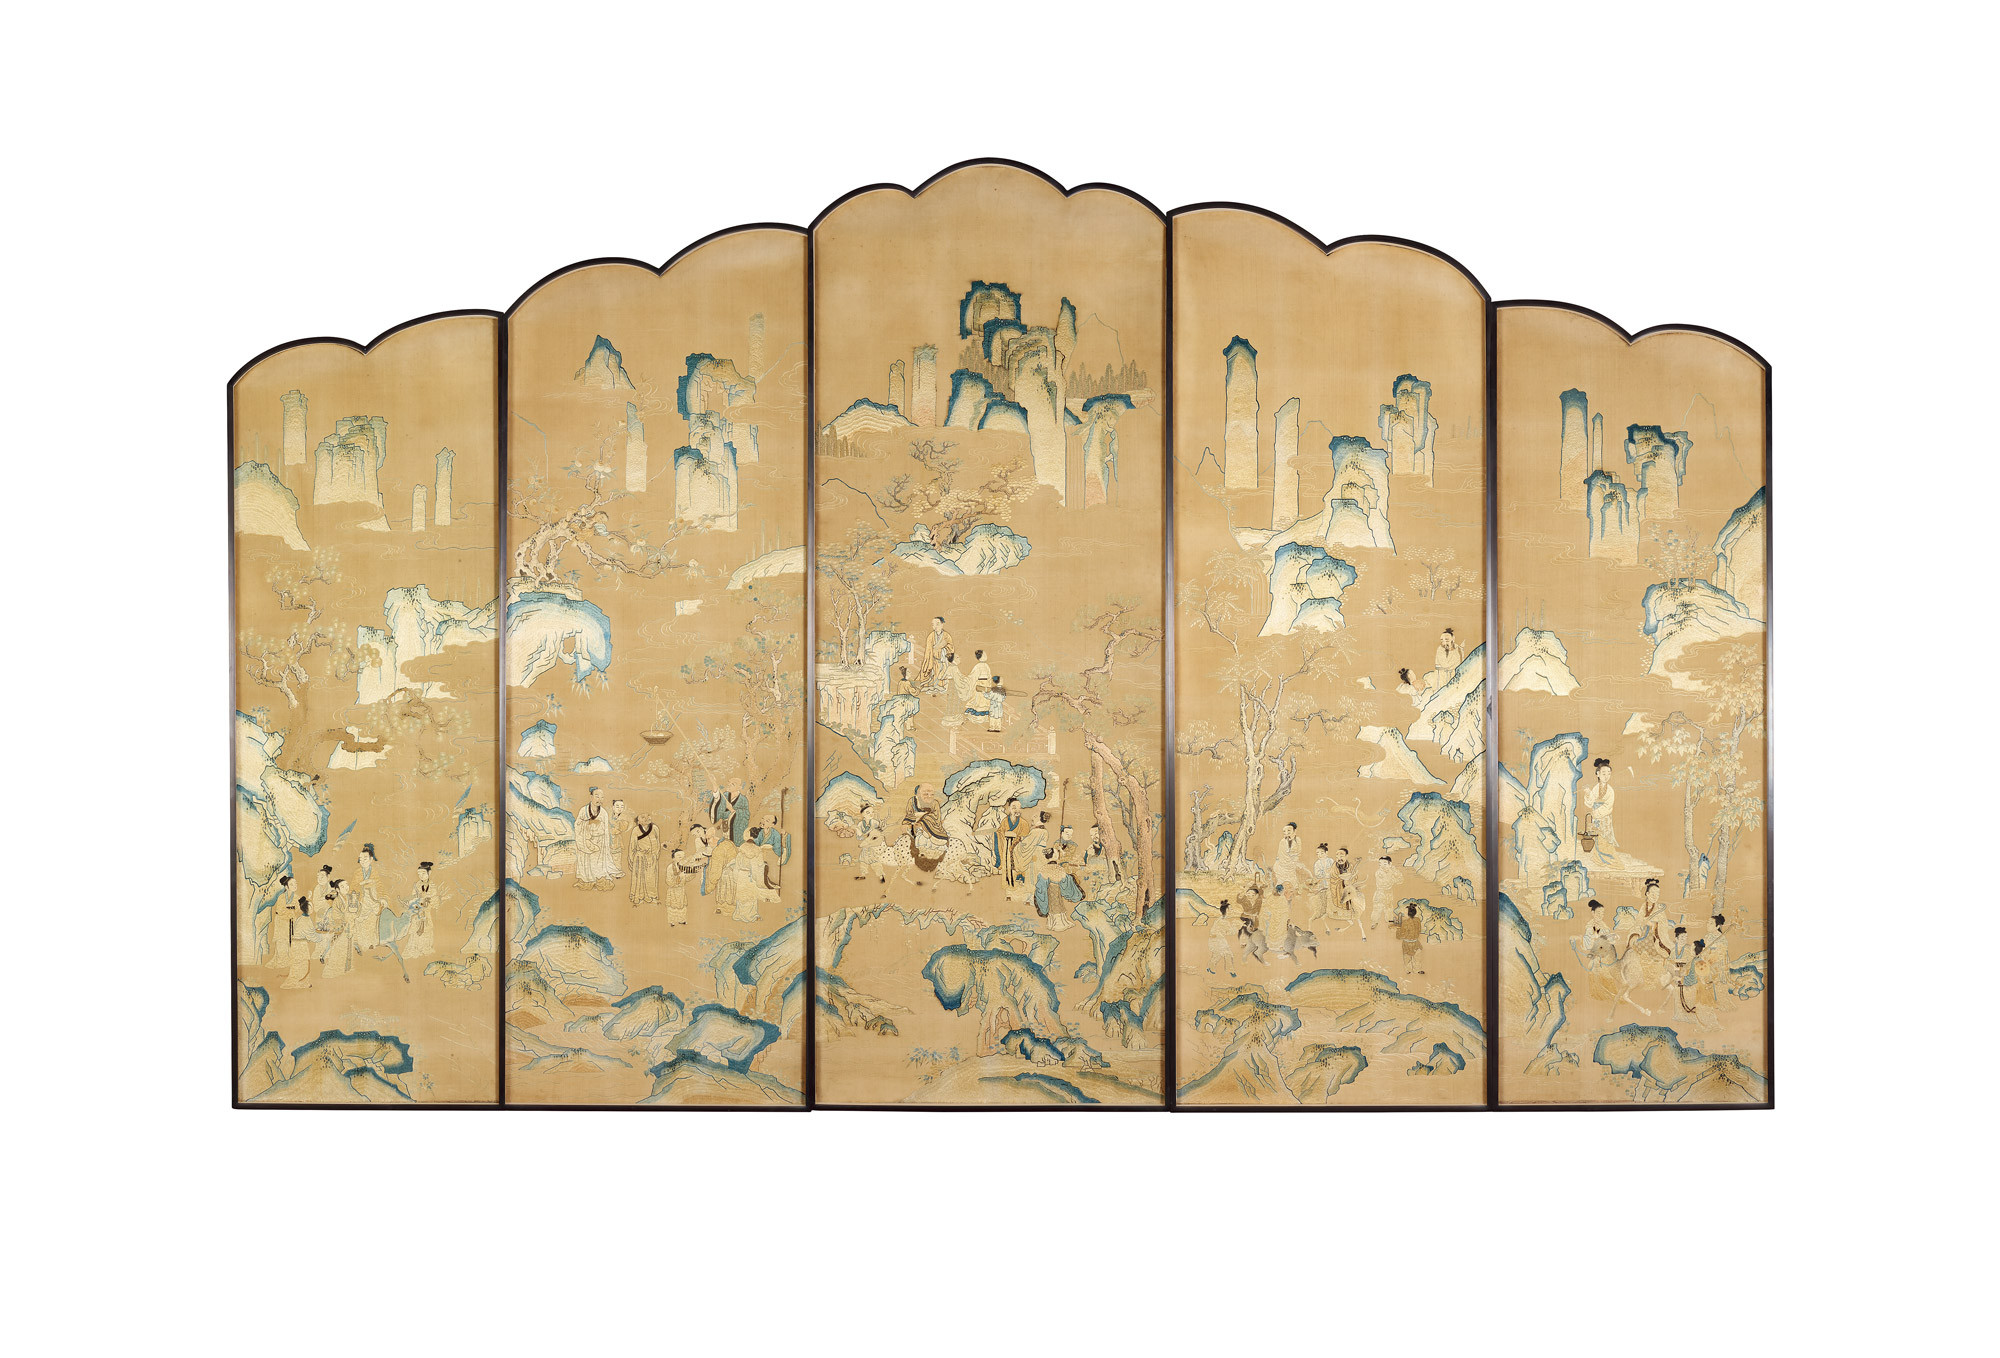 AN IMPORTANT AND FINELY SET OF EMBROIDED LANDSCAPE FIVE-PANEL SCREENS WITH LANDSCAPE